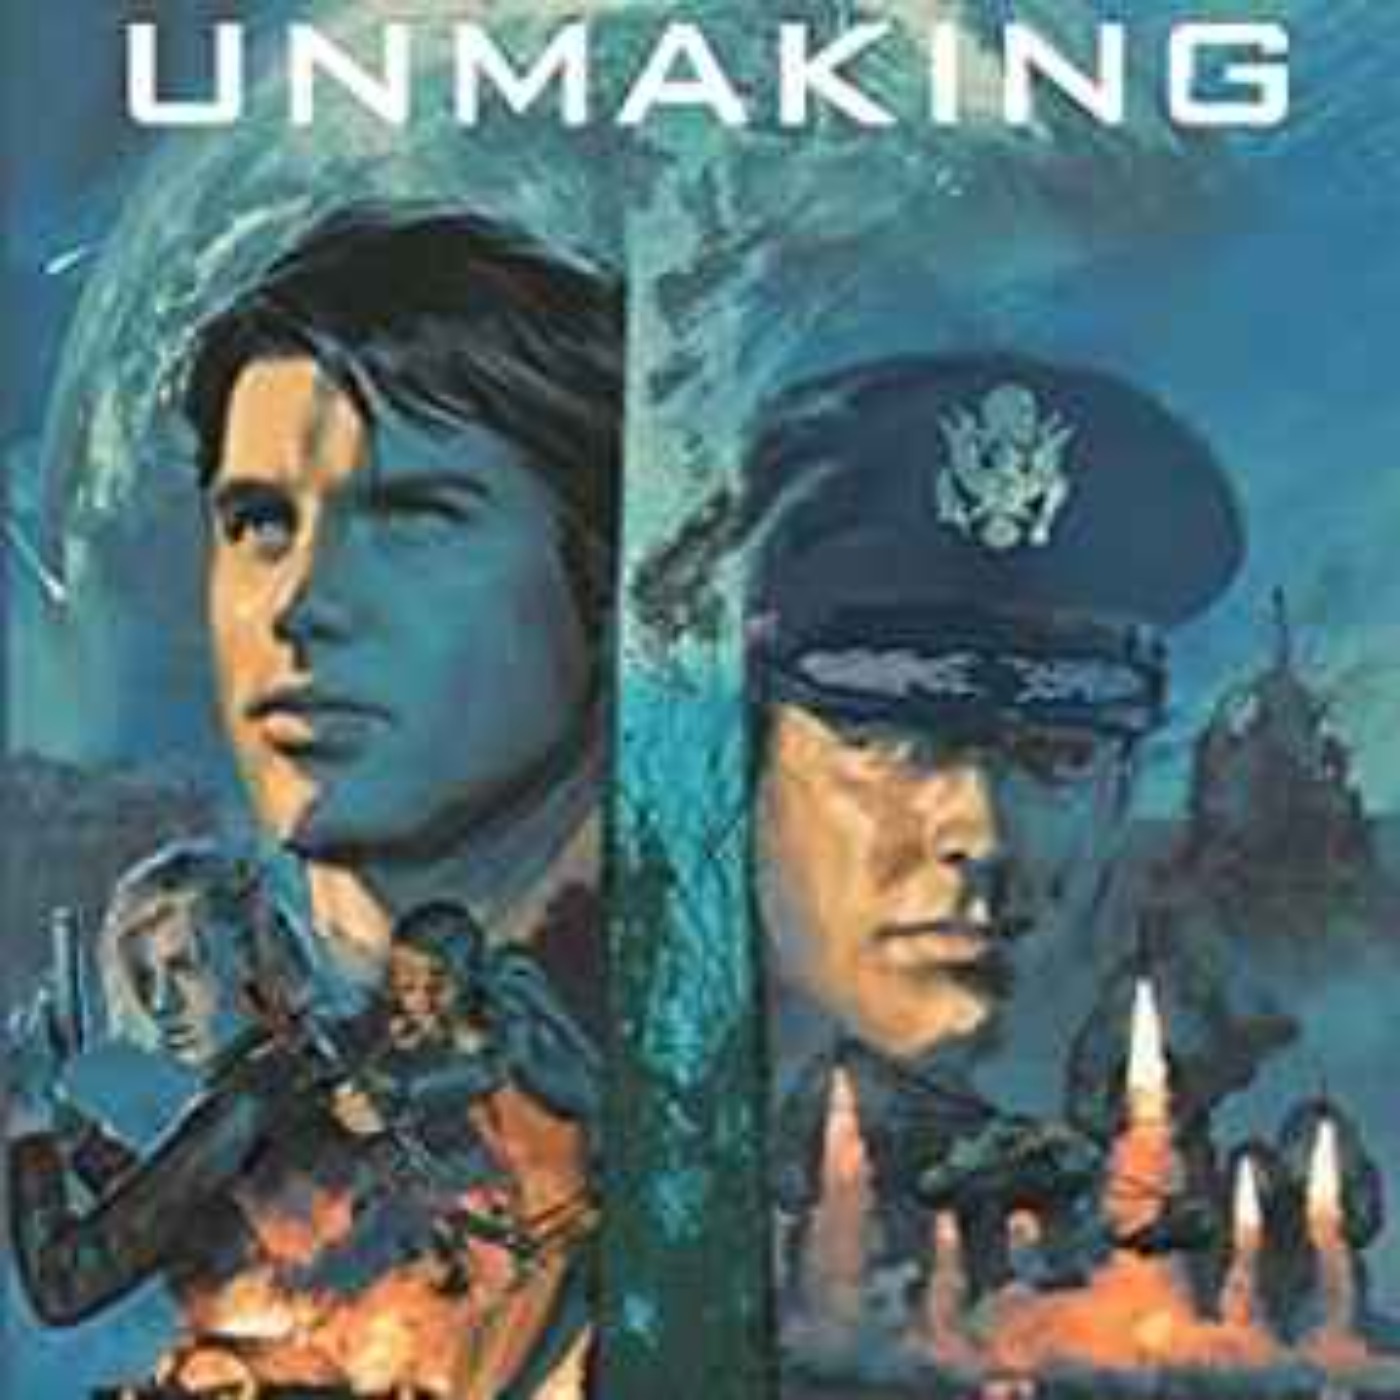 Brian A. Nelson - The Great Unmaking (The Course of Empire Series Book 3)